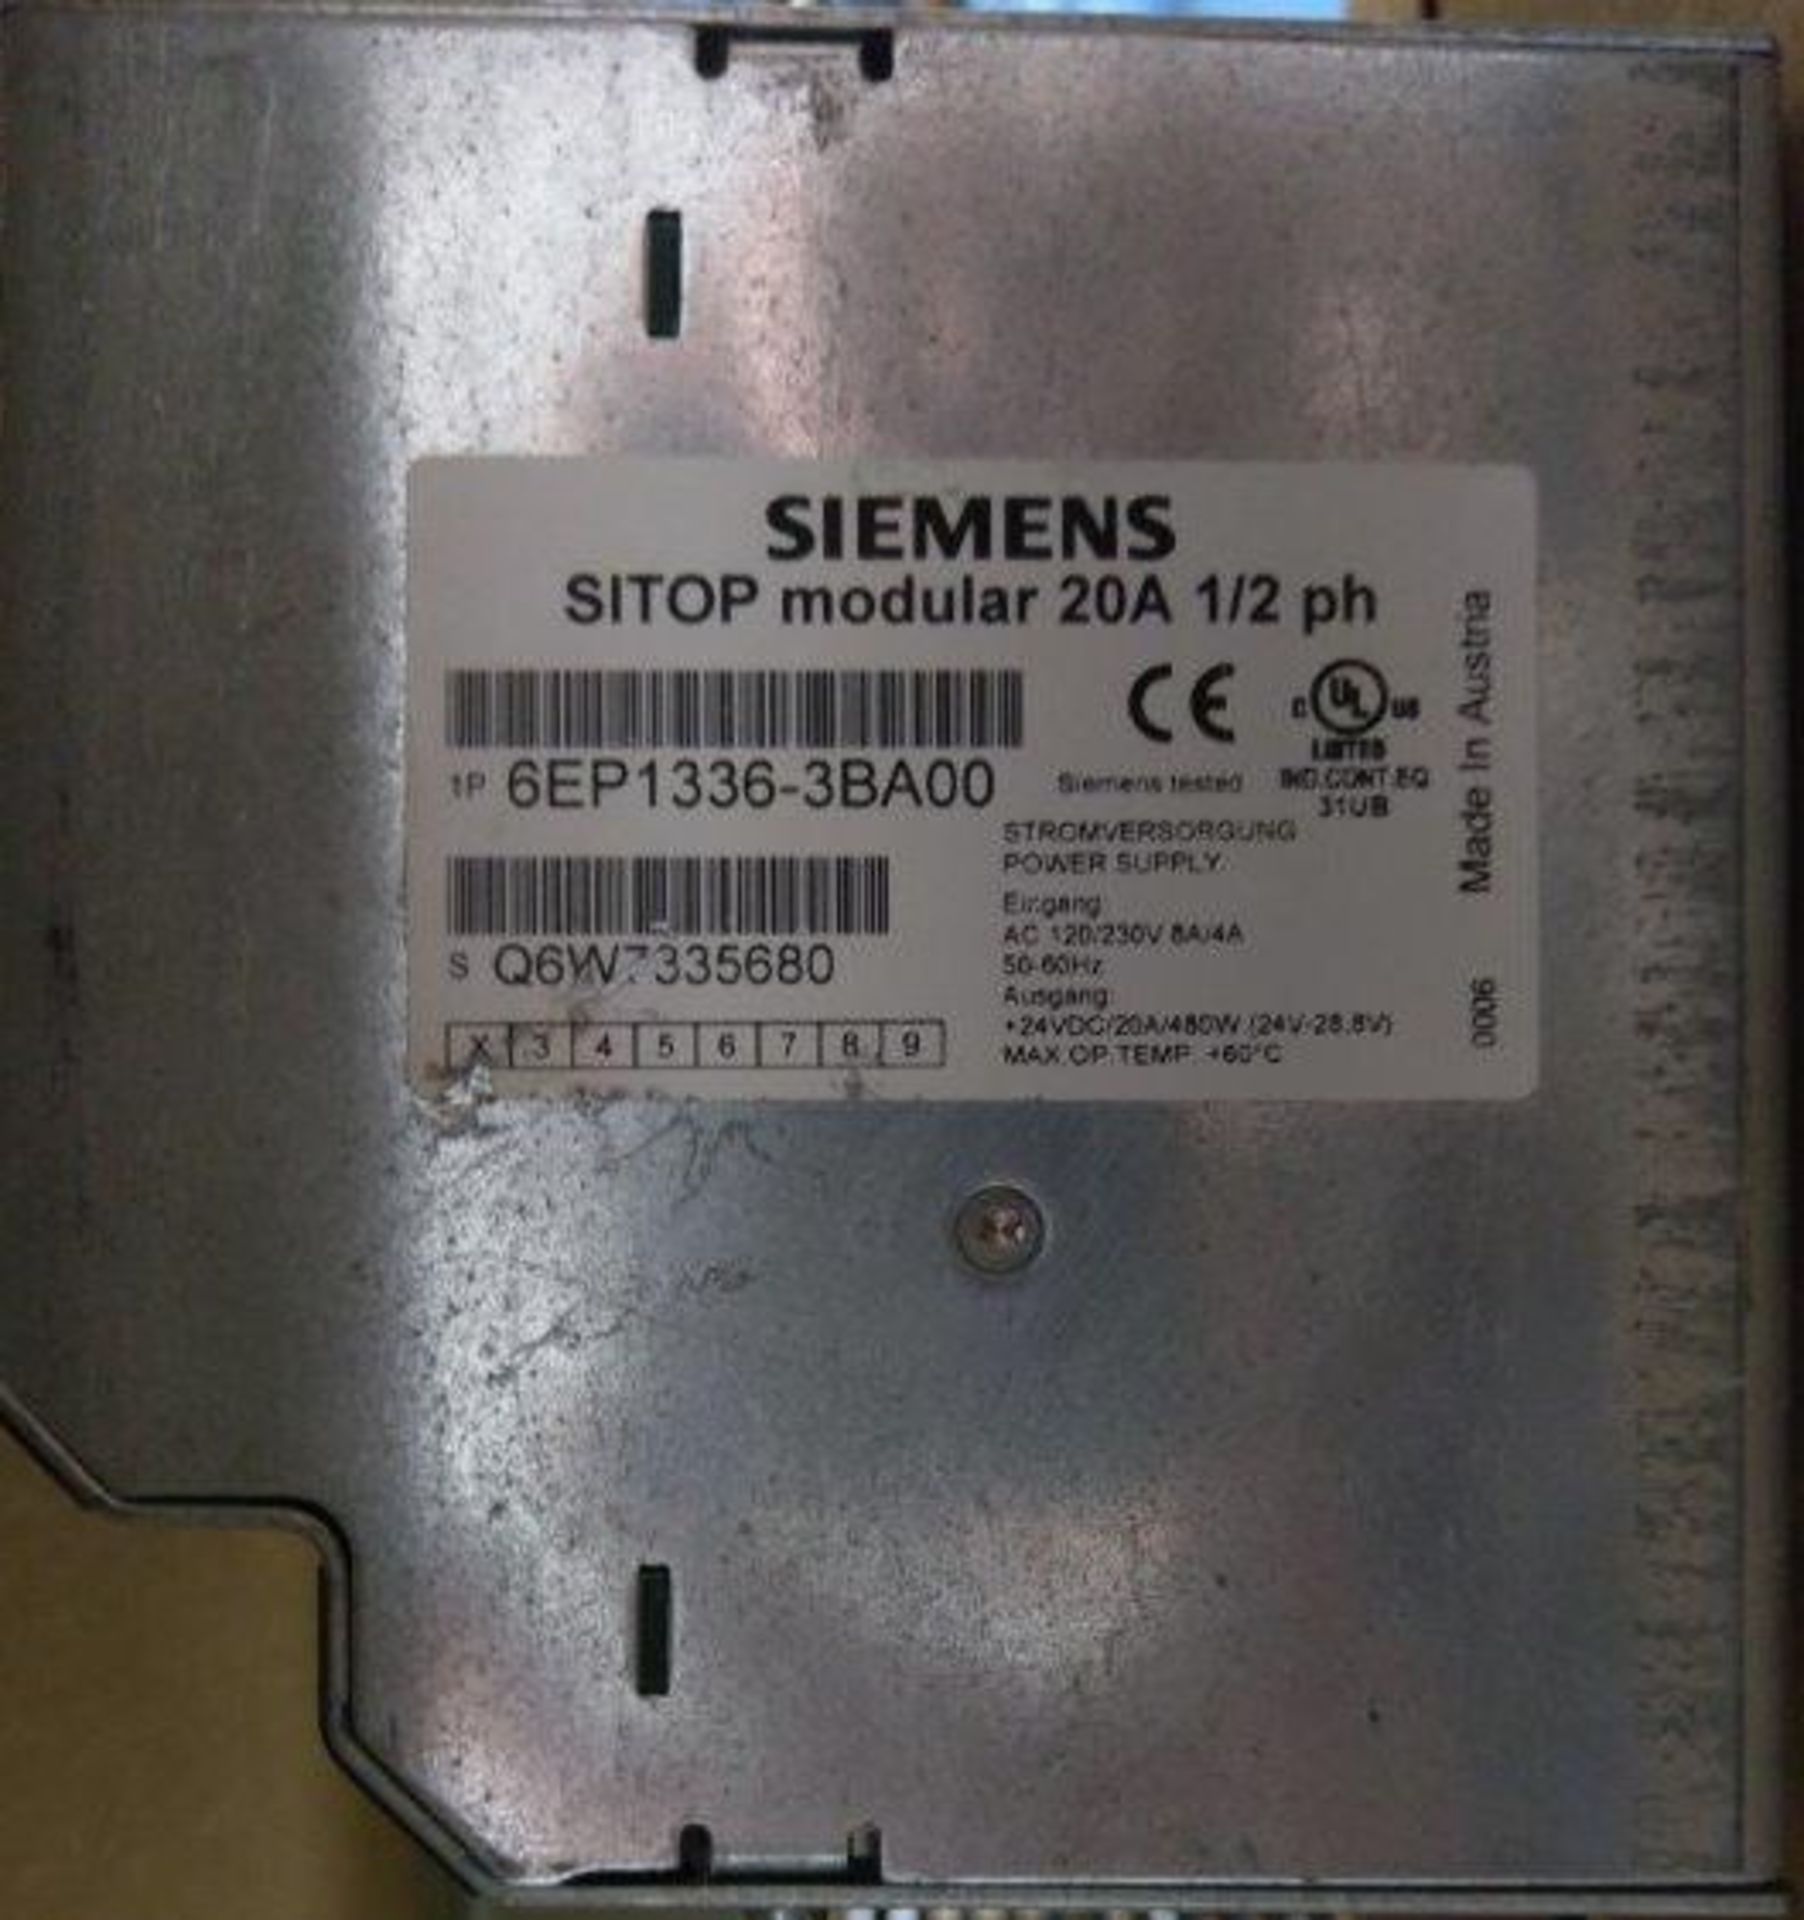 Lot of 4 Siemens SITOP Power Supply Model 1P 6EP1336-3BA00 - Image 2 of 3